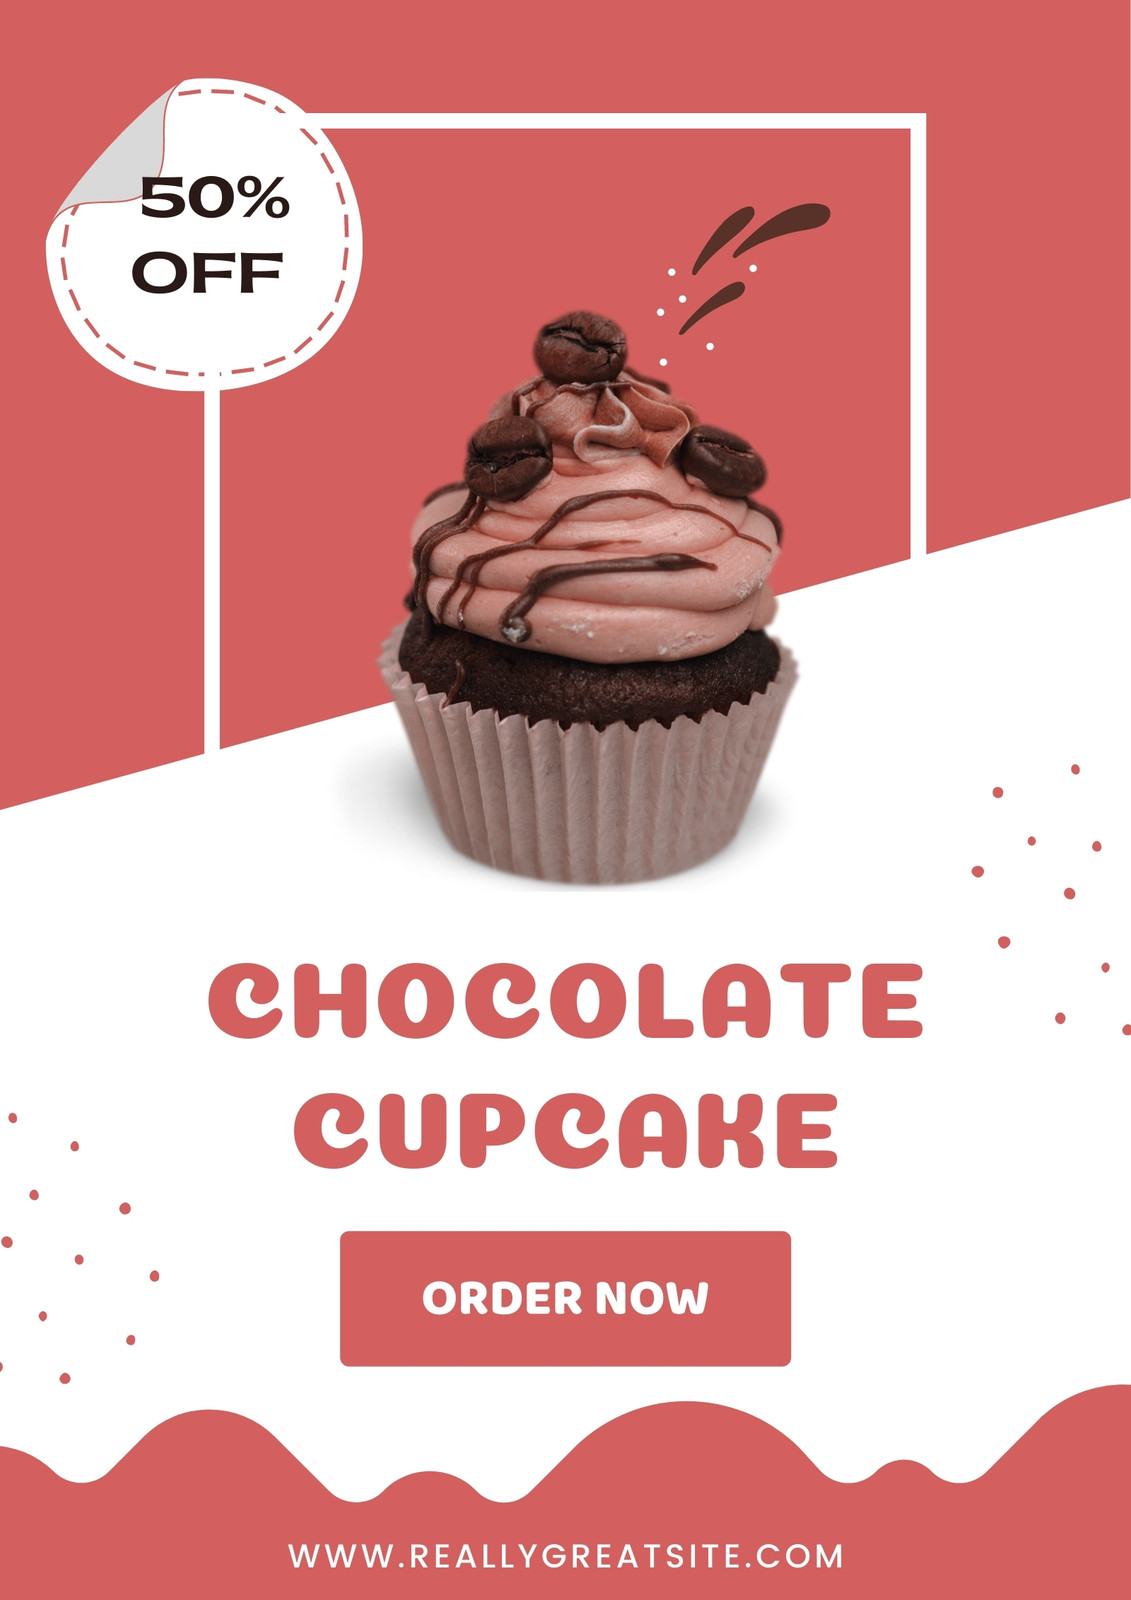 Page 2 - Customize 436+ Cake Flyer Templates Online - Canva